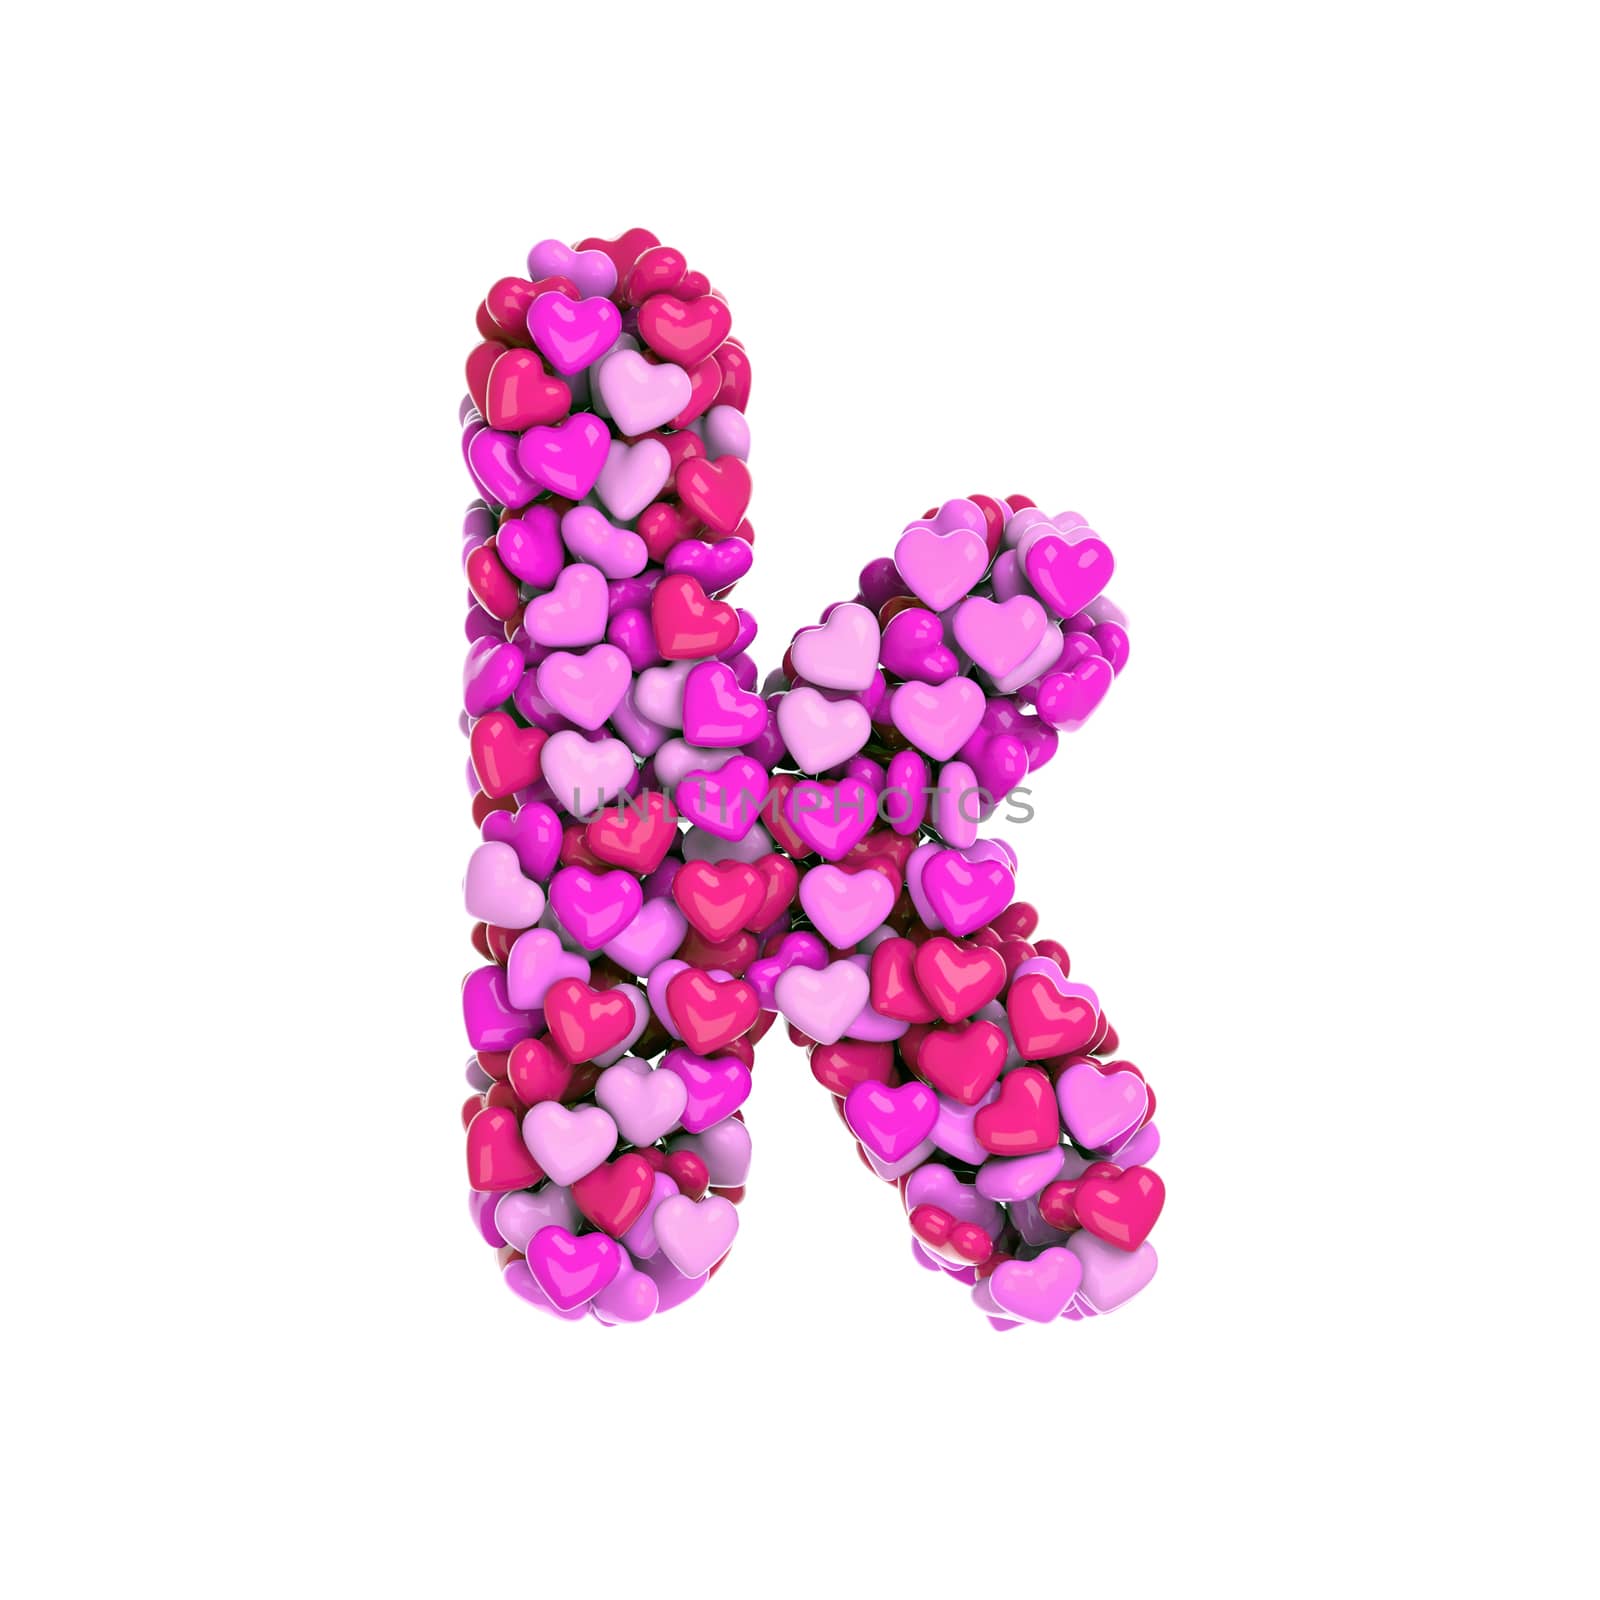 Valentine letter K - Lower-case 3d pink hearts font - Love, passion or wedding concept by chrisroll